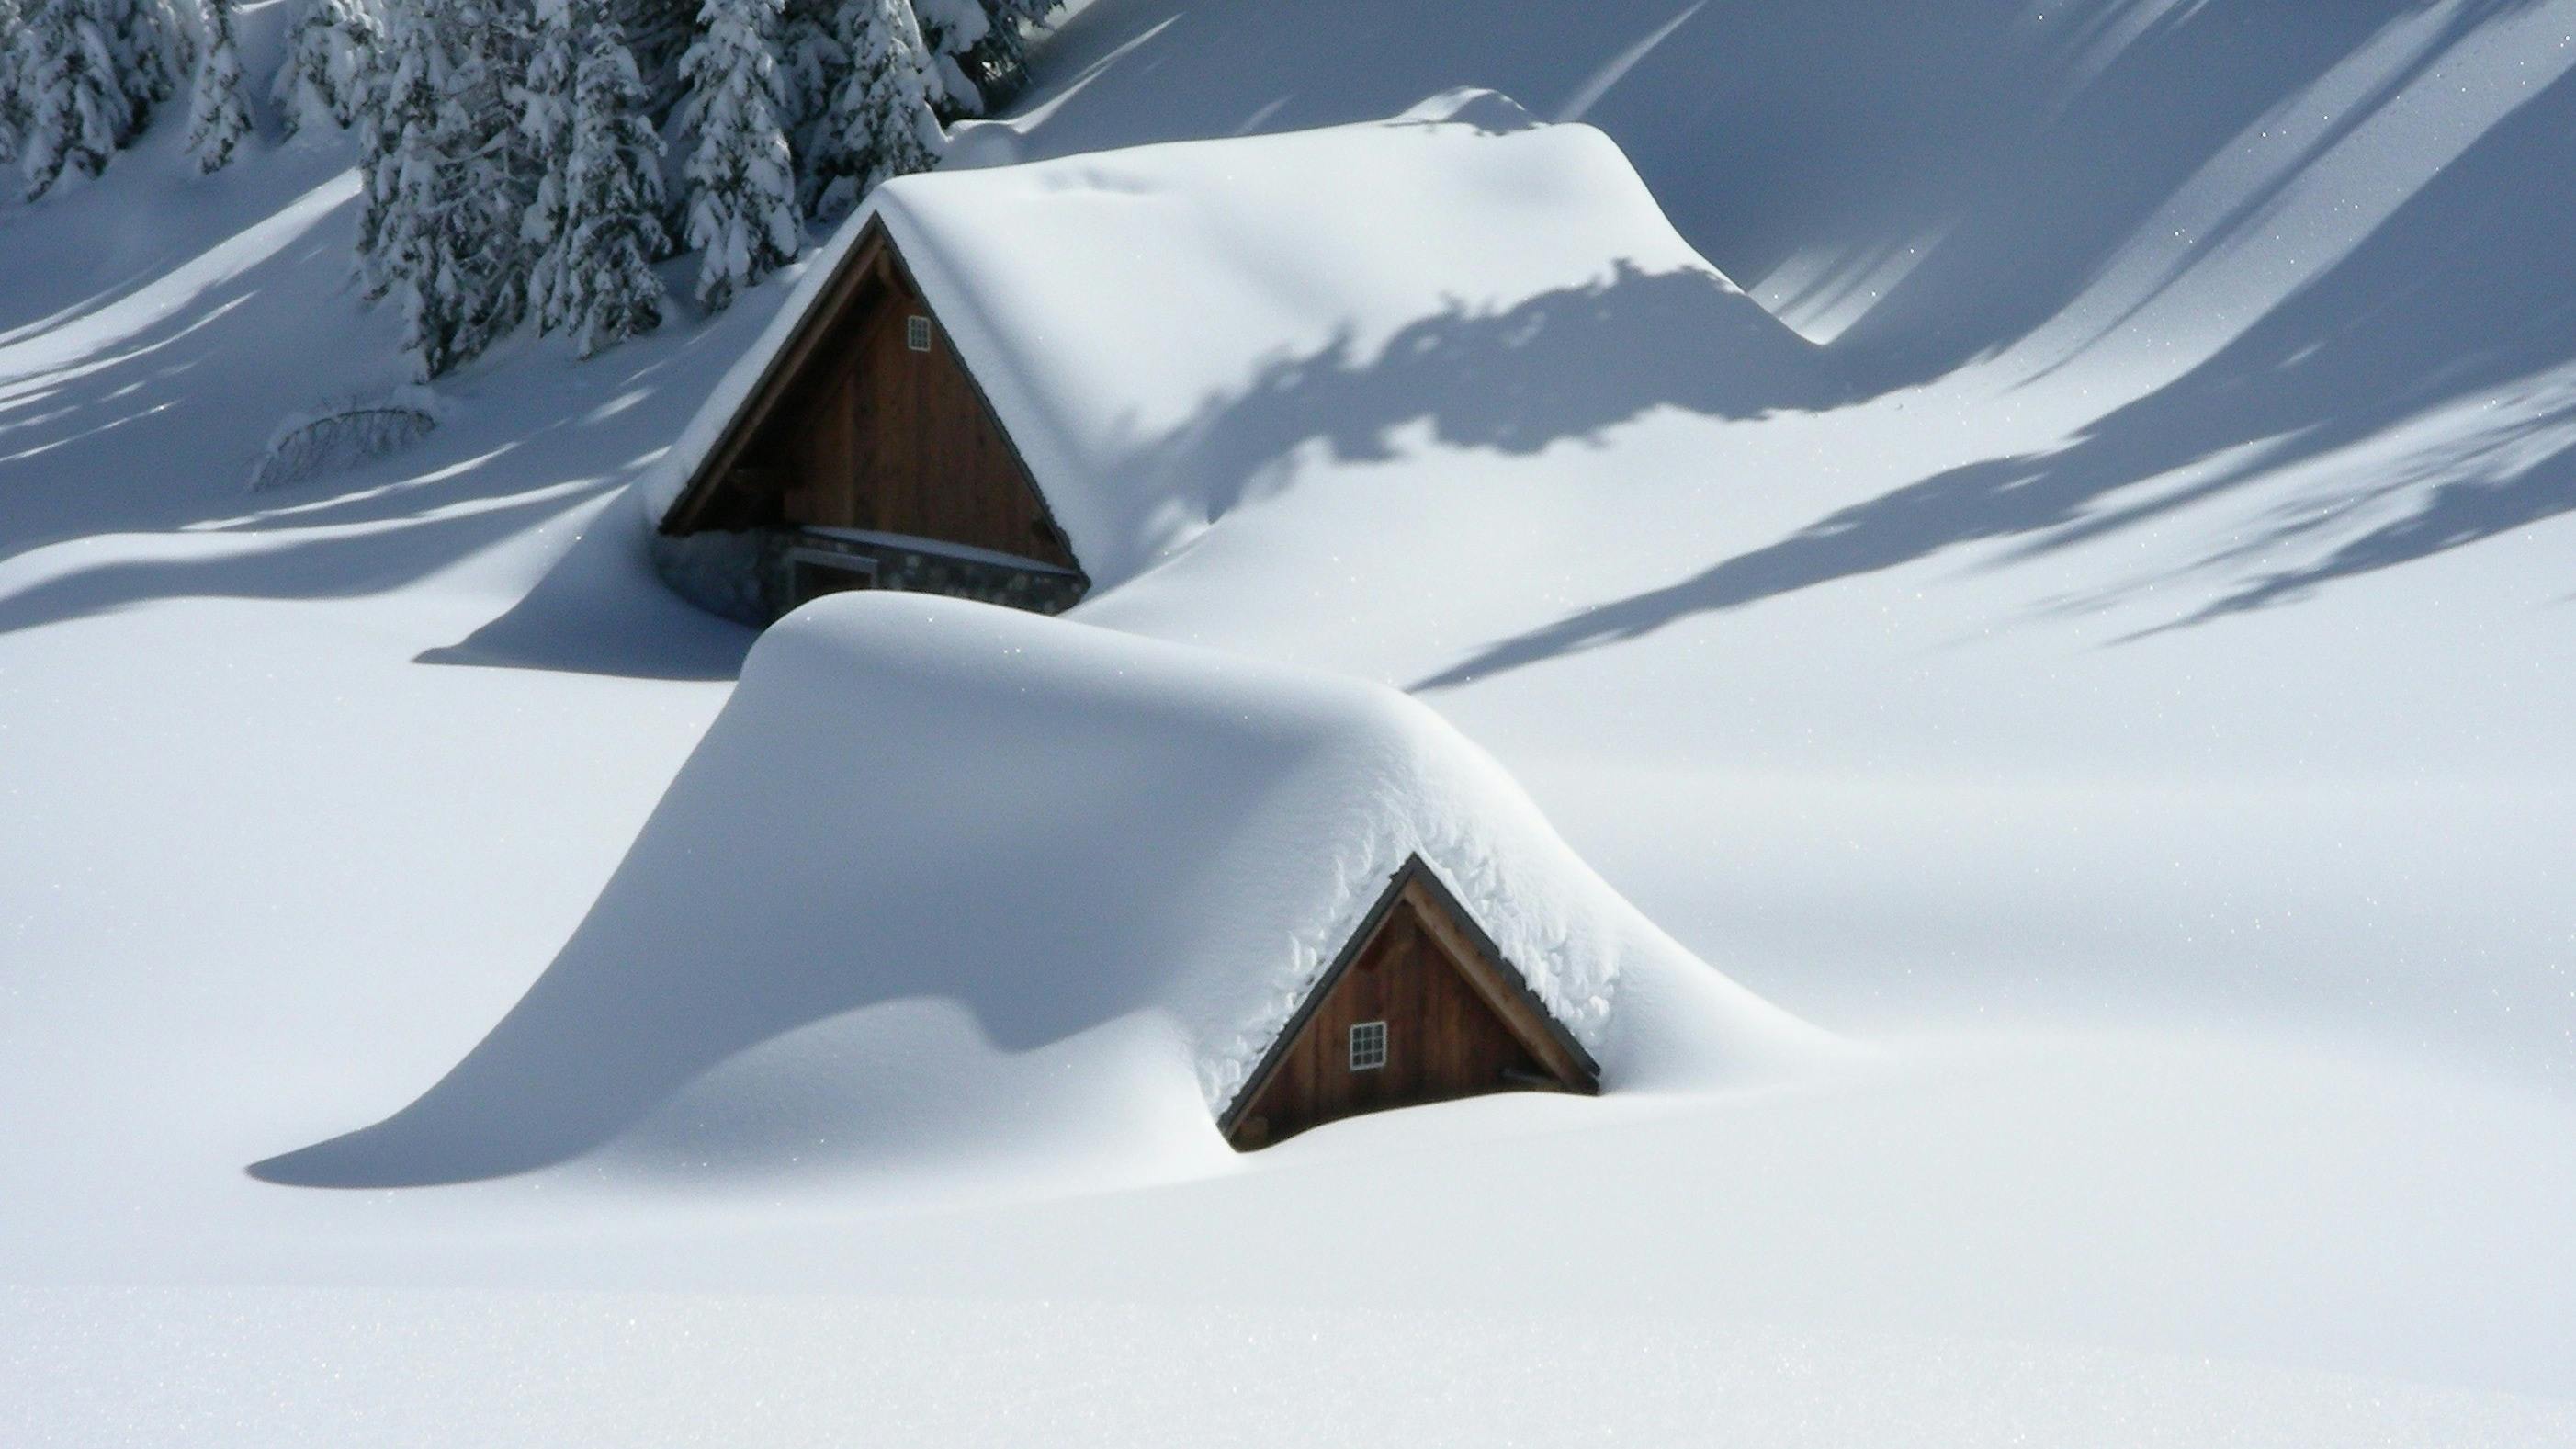 Heavy snow covering cabins